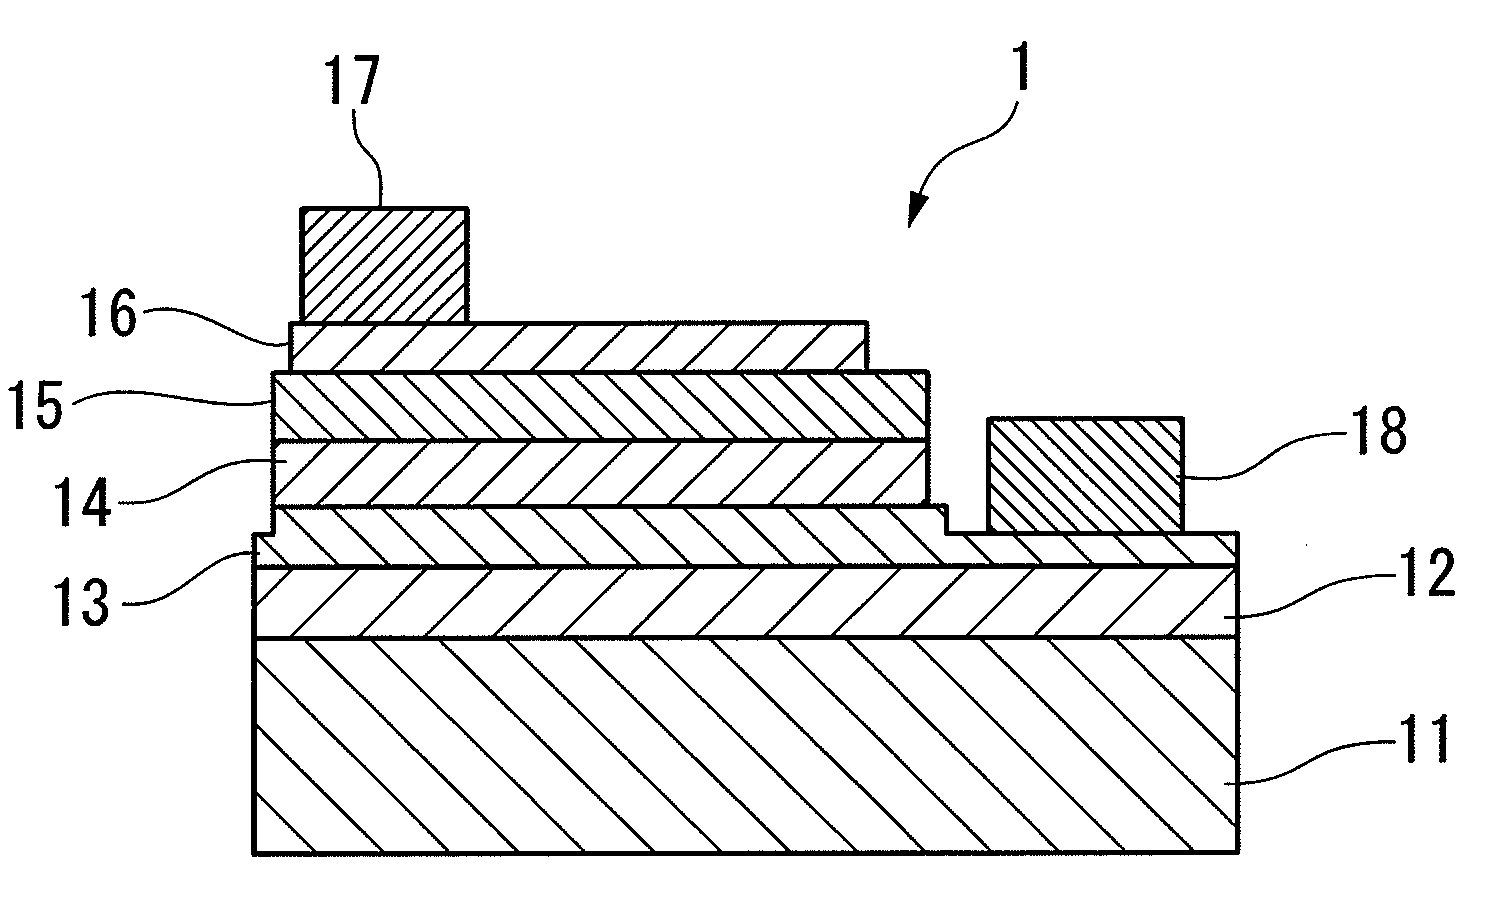 Semiconductor light-emitting device, method of manufacturing the same, and lamp including the same